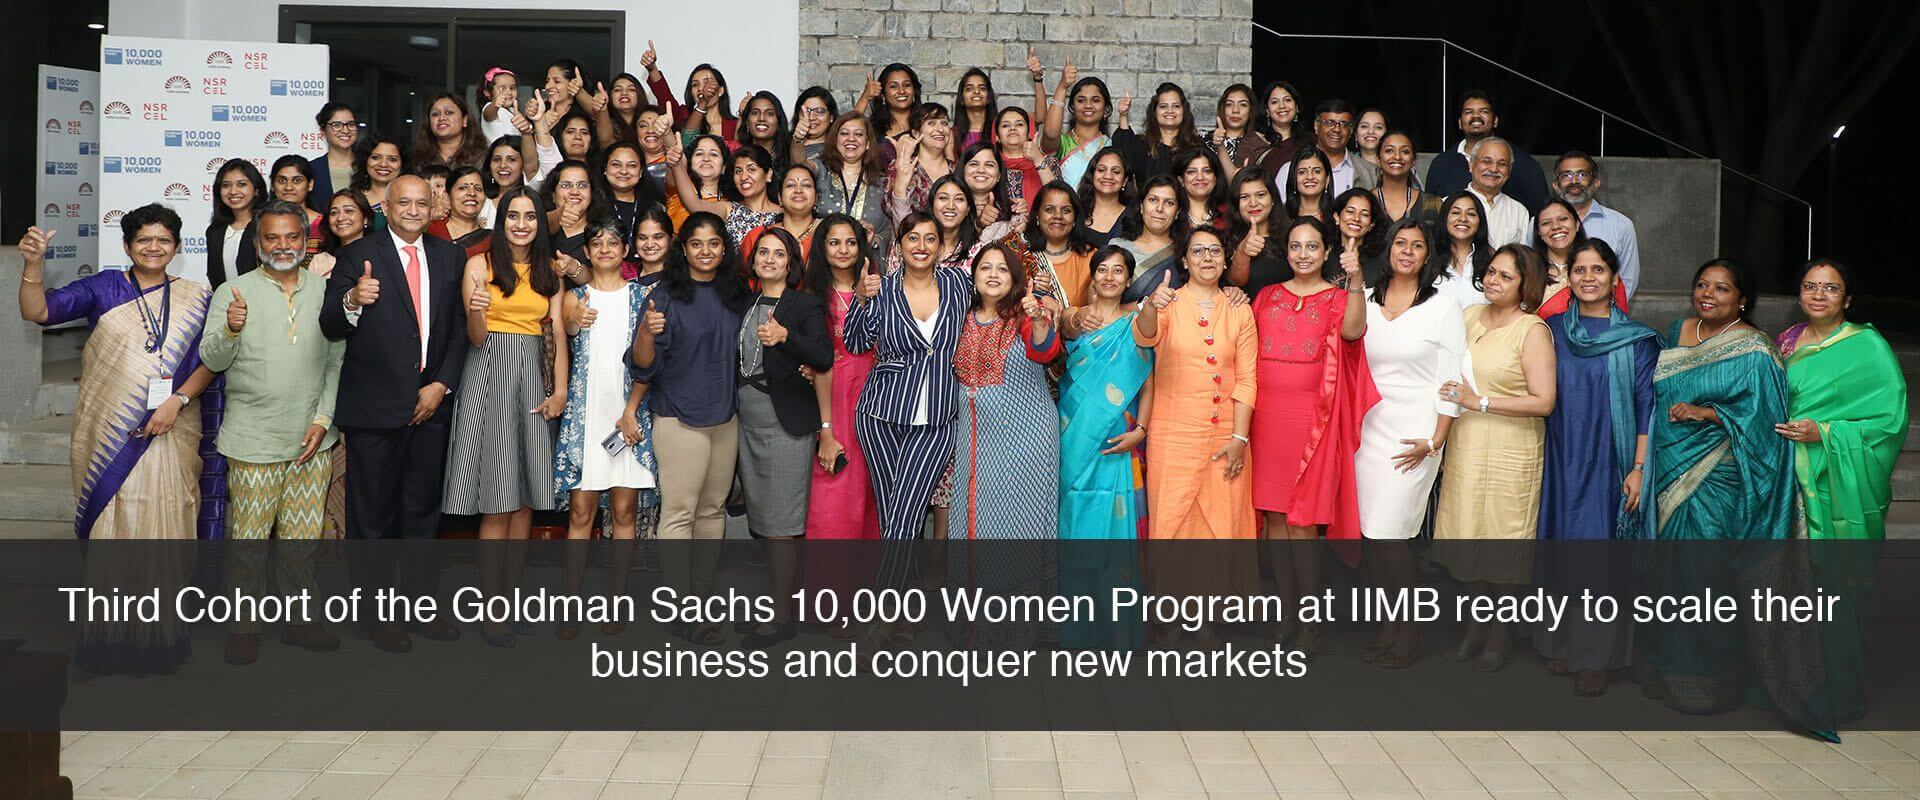 Third Cohort of the Goldman Sachs 10,000 Women Program at IIMB ready to scale their business and conquer new markets